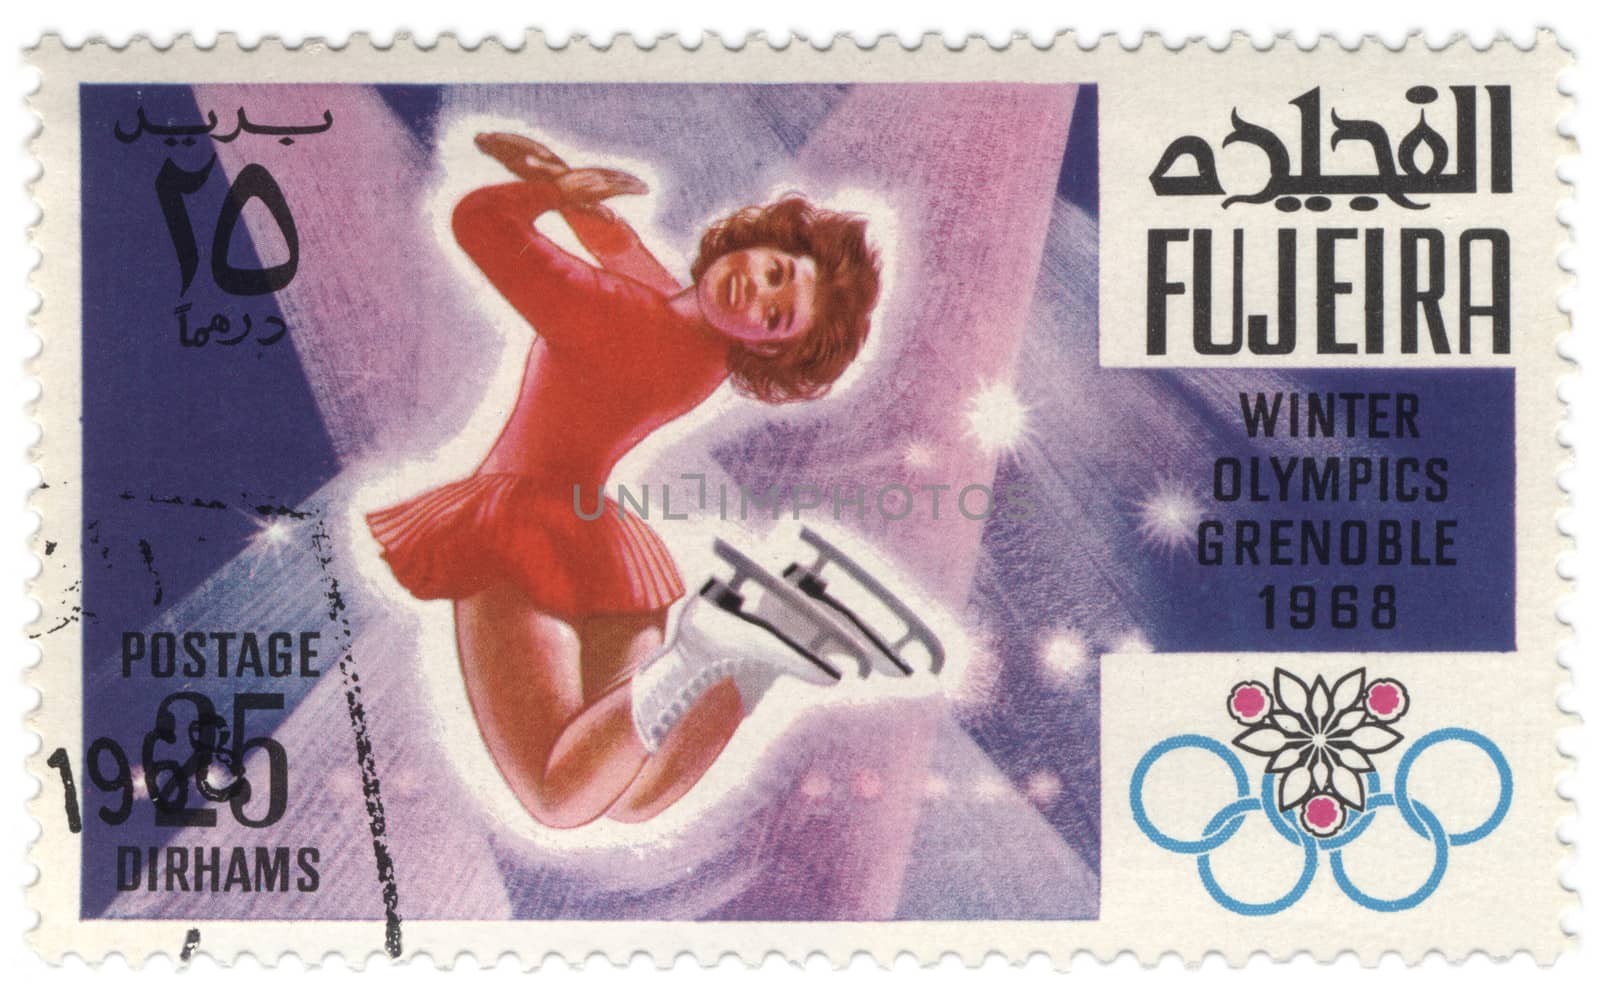 Figure skating at the Winter Olympics in Grenoble on postage sta by wander